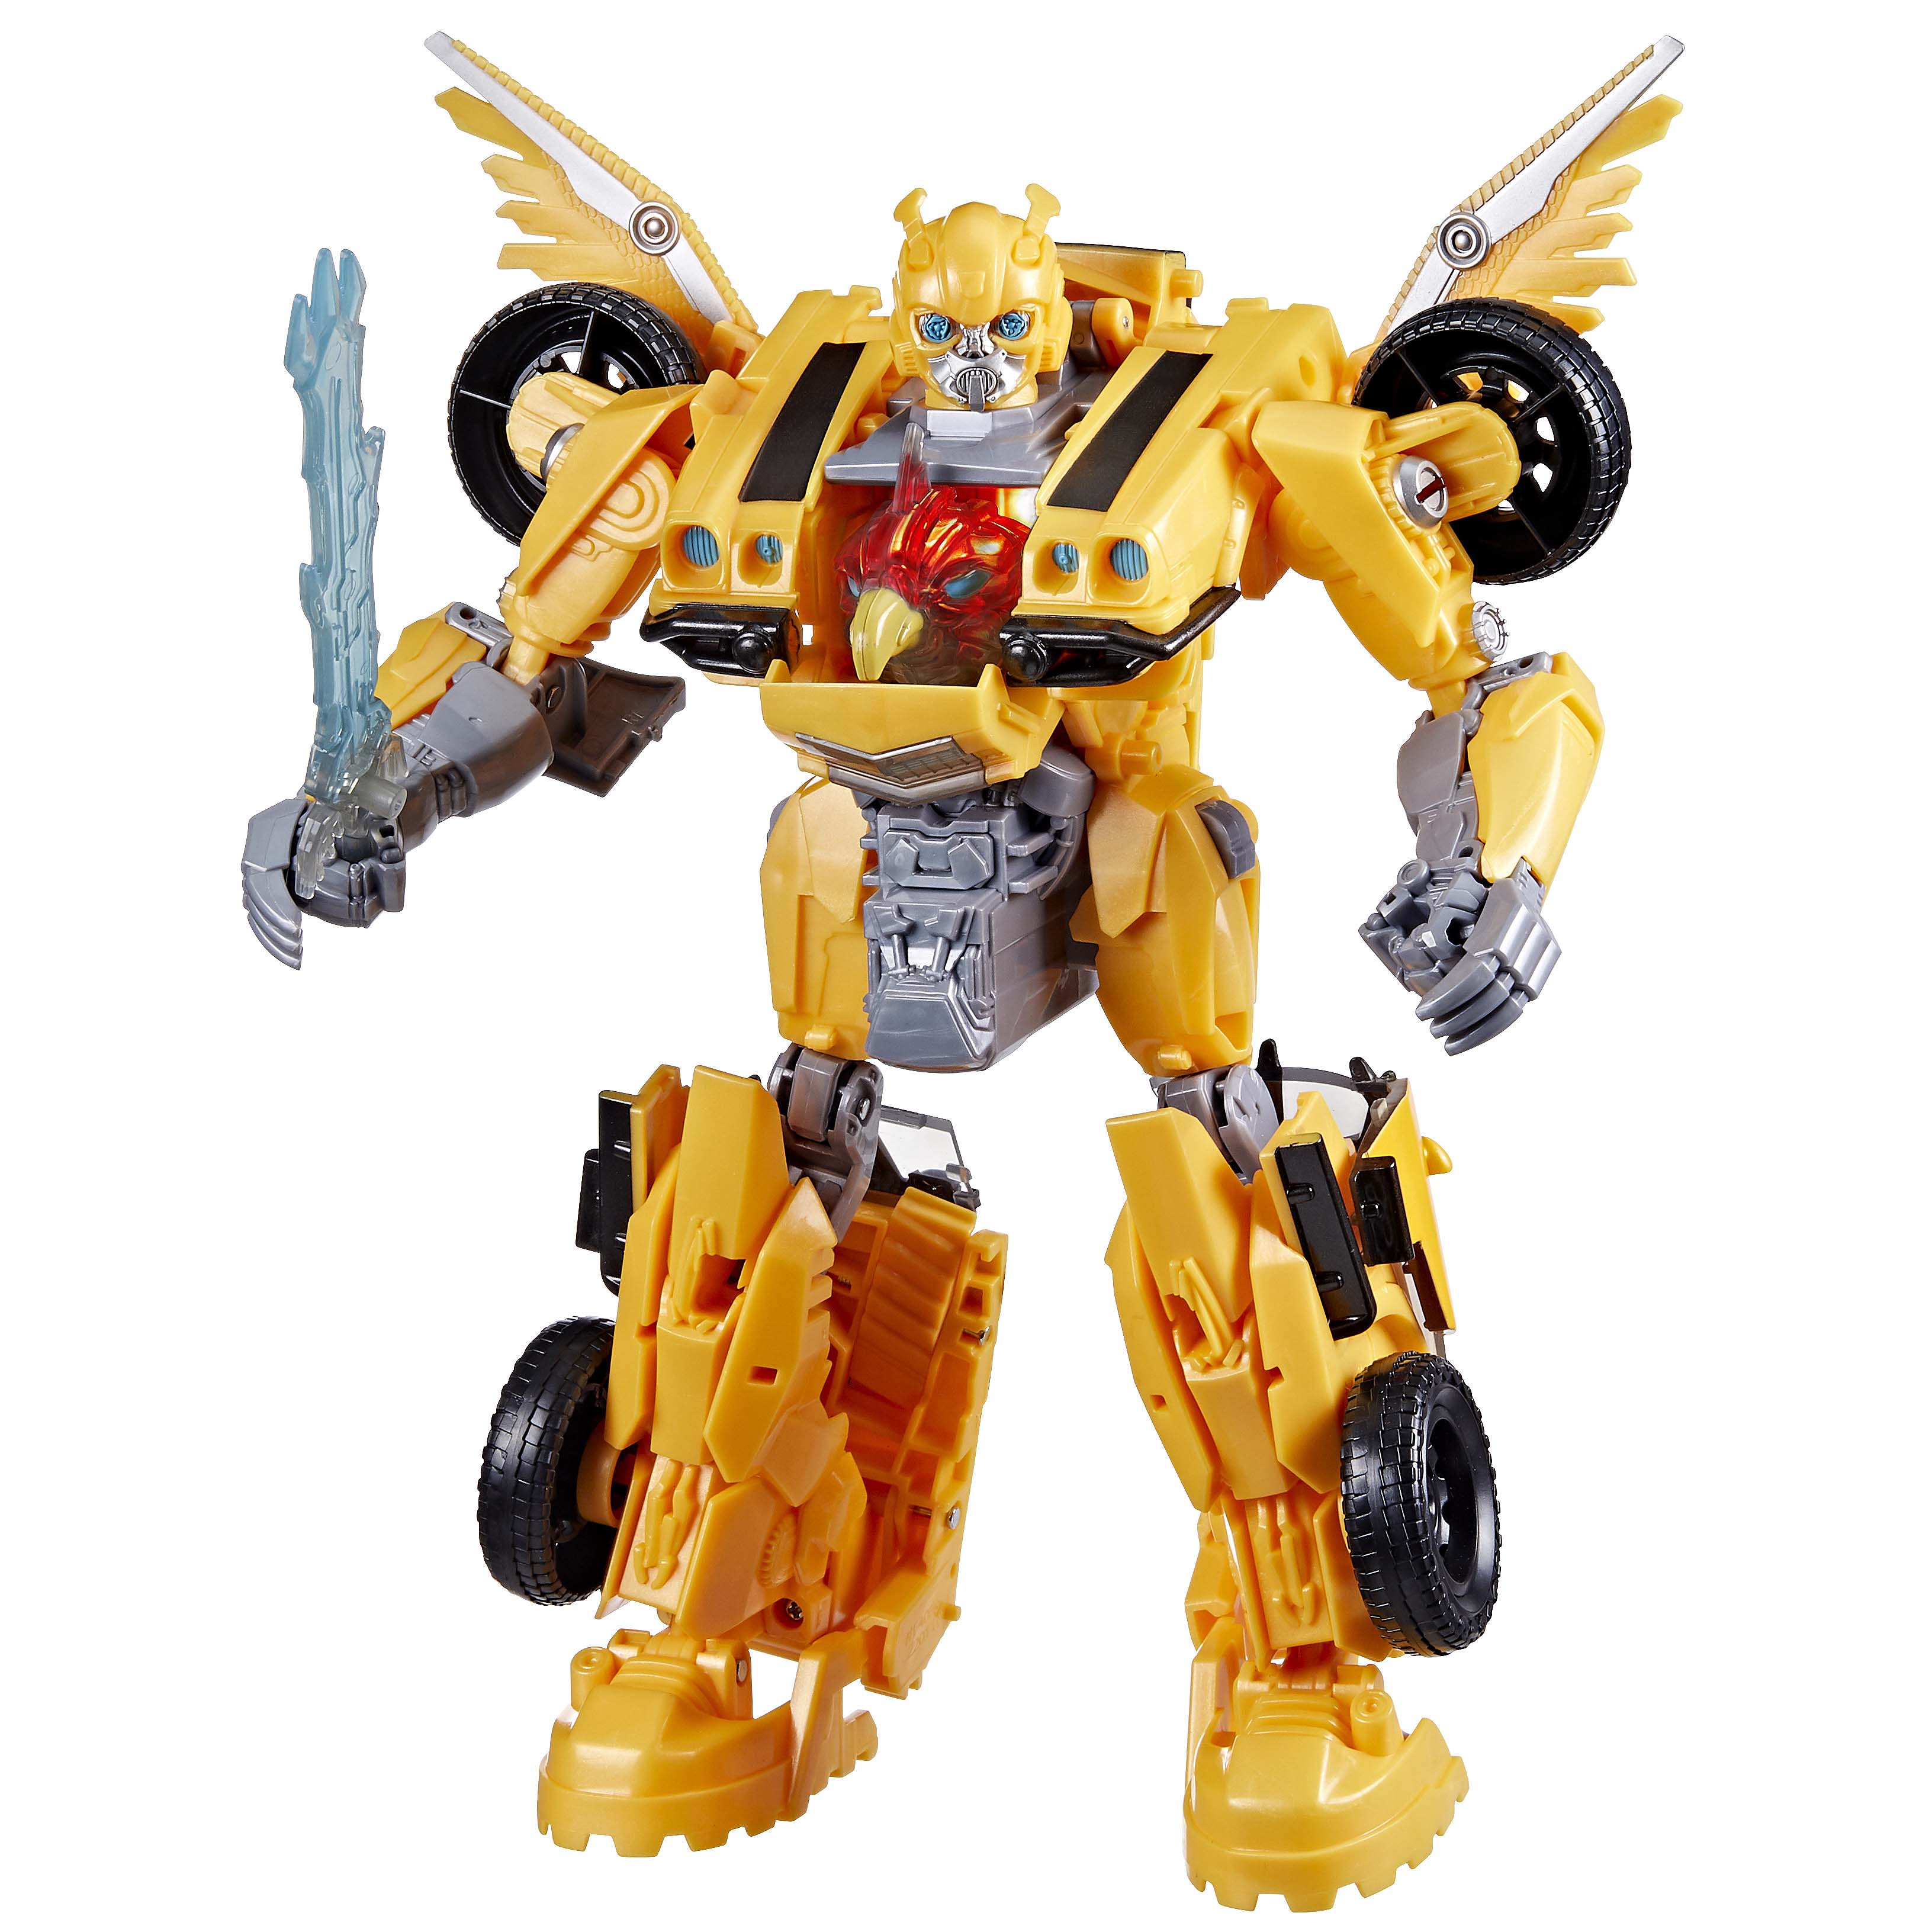 Hasbro Toy Fair 2007 Preview: Ultimate Camaro Bumblebee and more! -  Transformers News - TFW2005